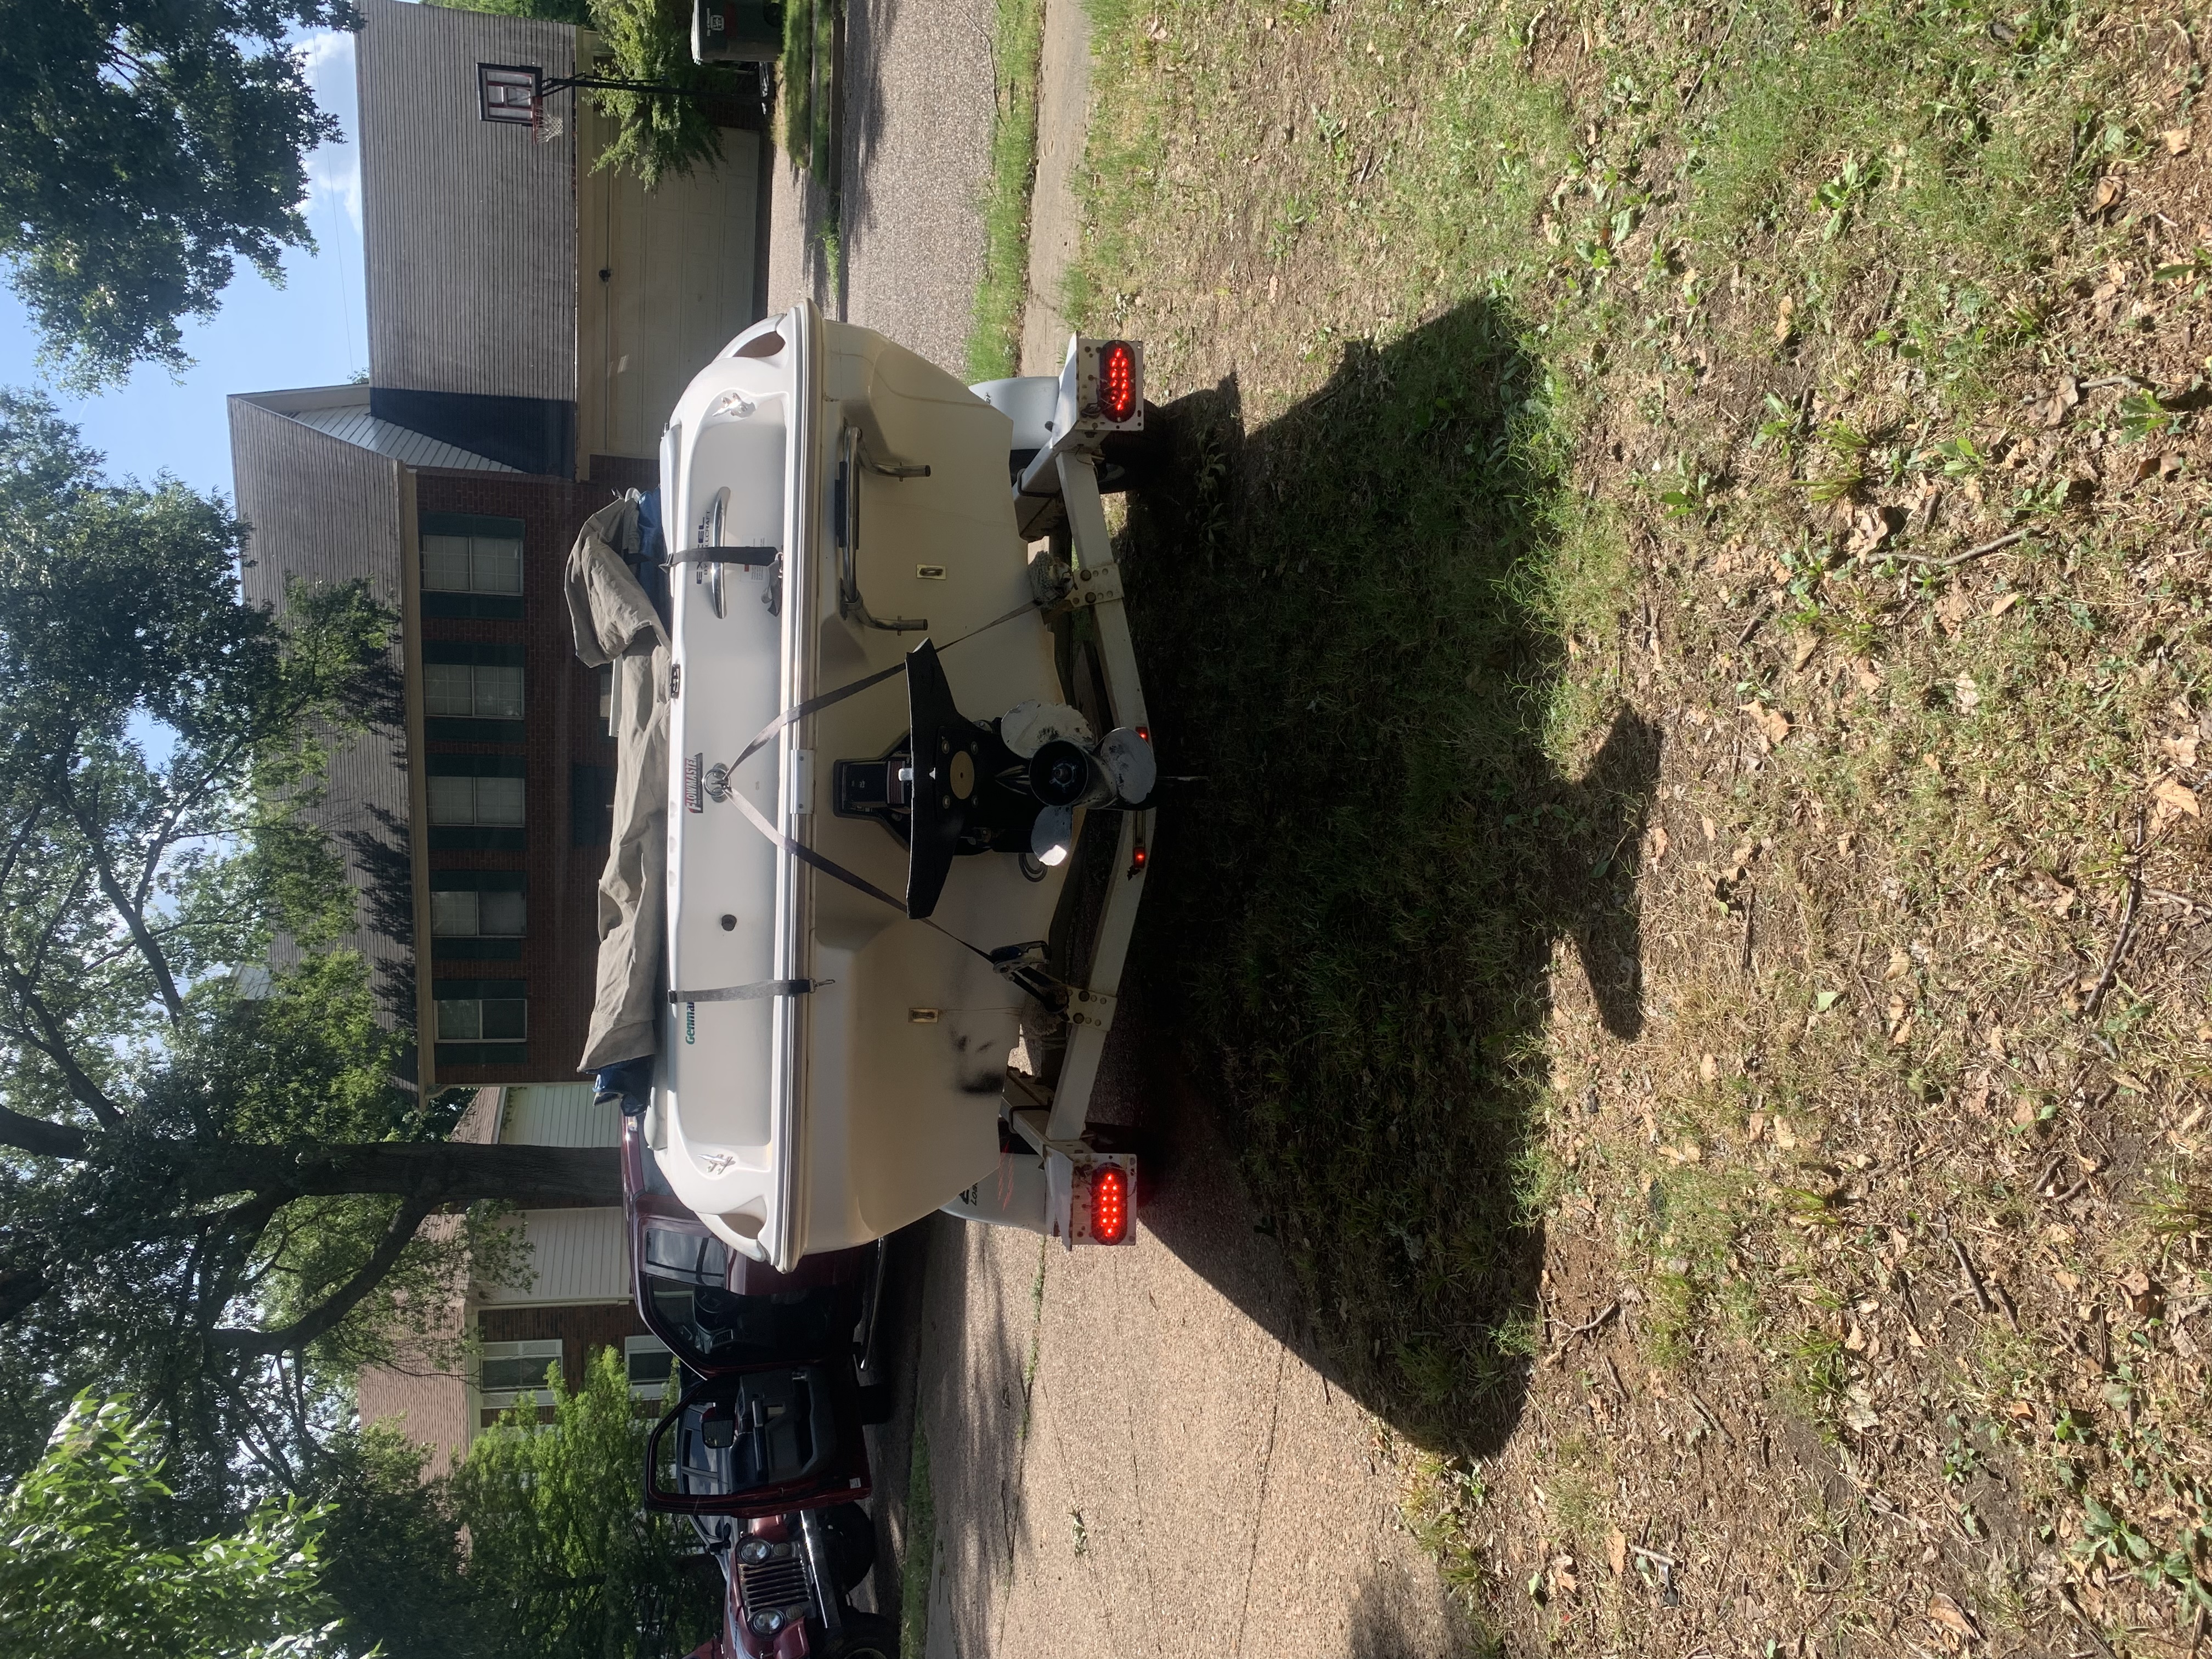 1996 Wellcraft Excel 19sx  Power boat for sale in Bartlett, TN - image 5 